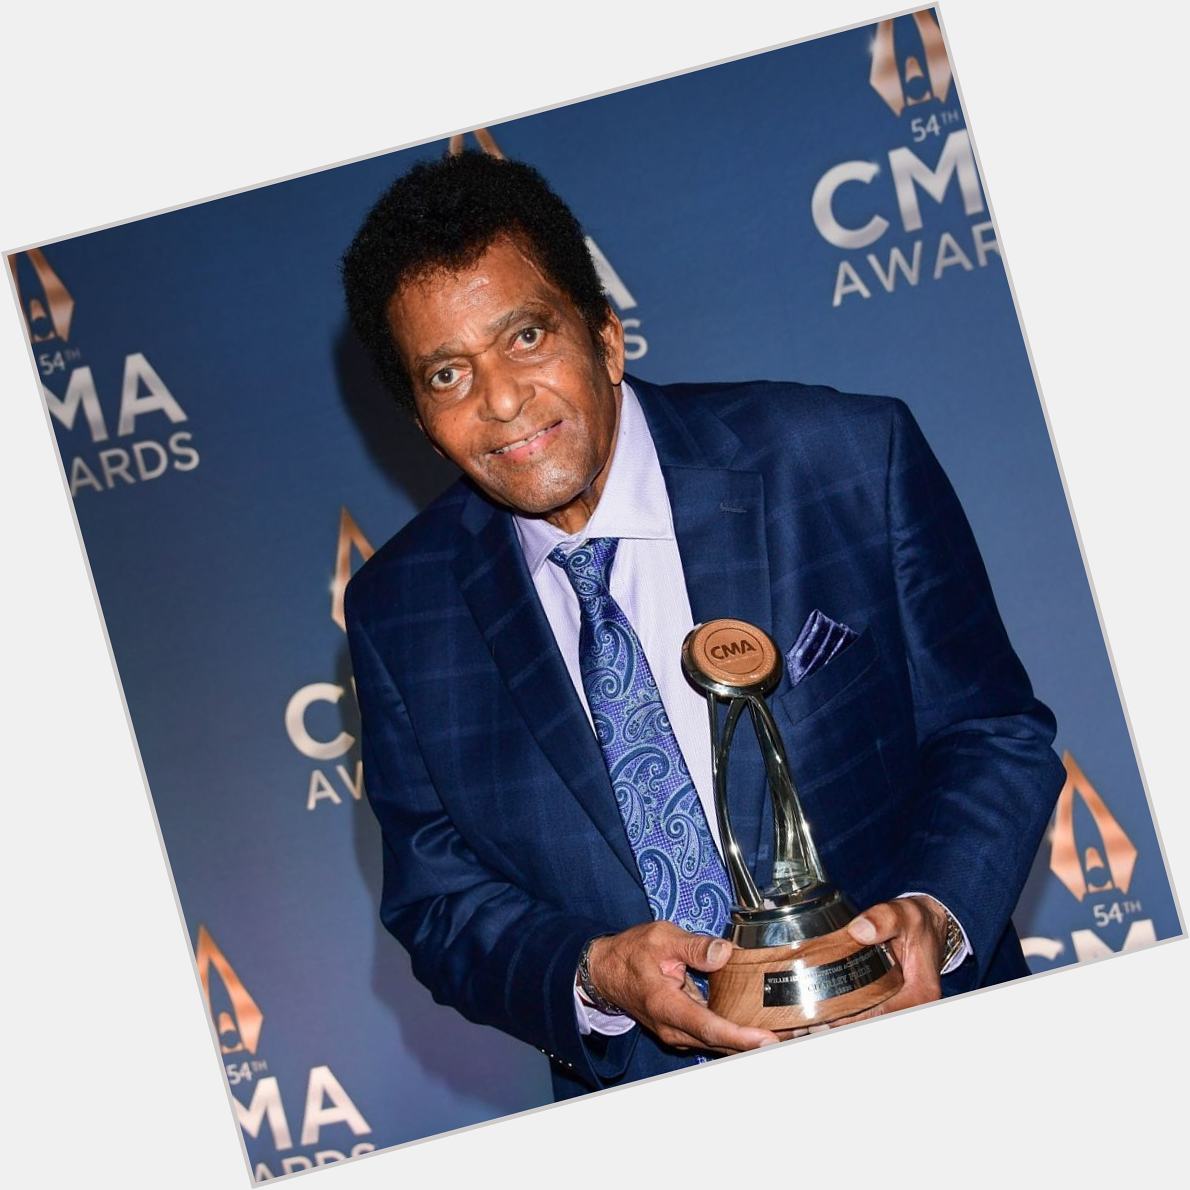 Today would have been Charley Pride\s 87th birthday. Happy Birthday Charley! 

Rest in peace. 